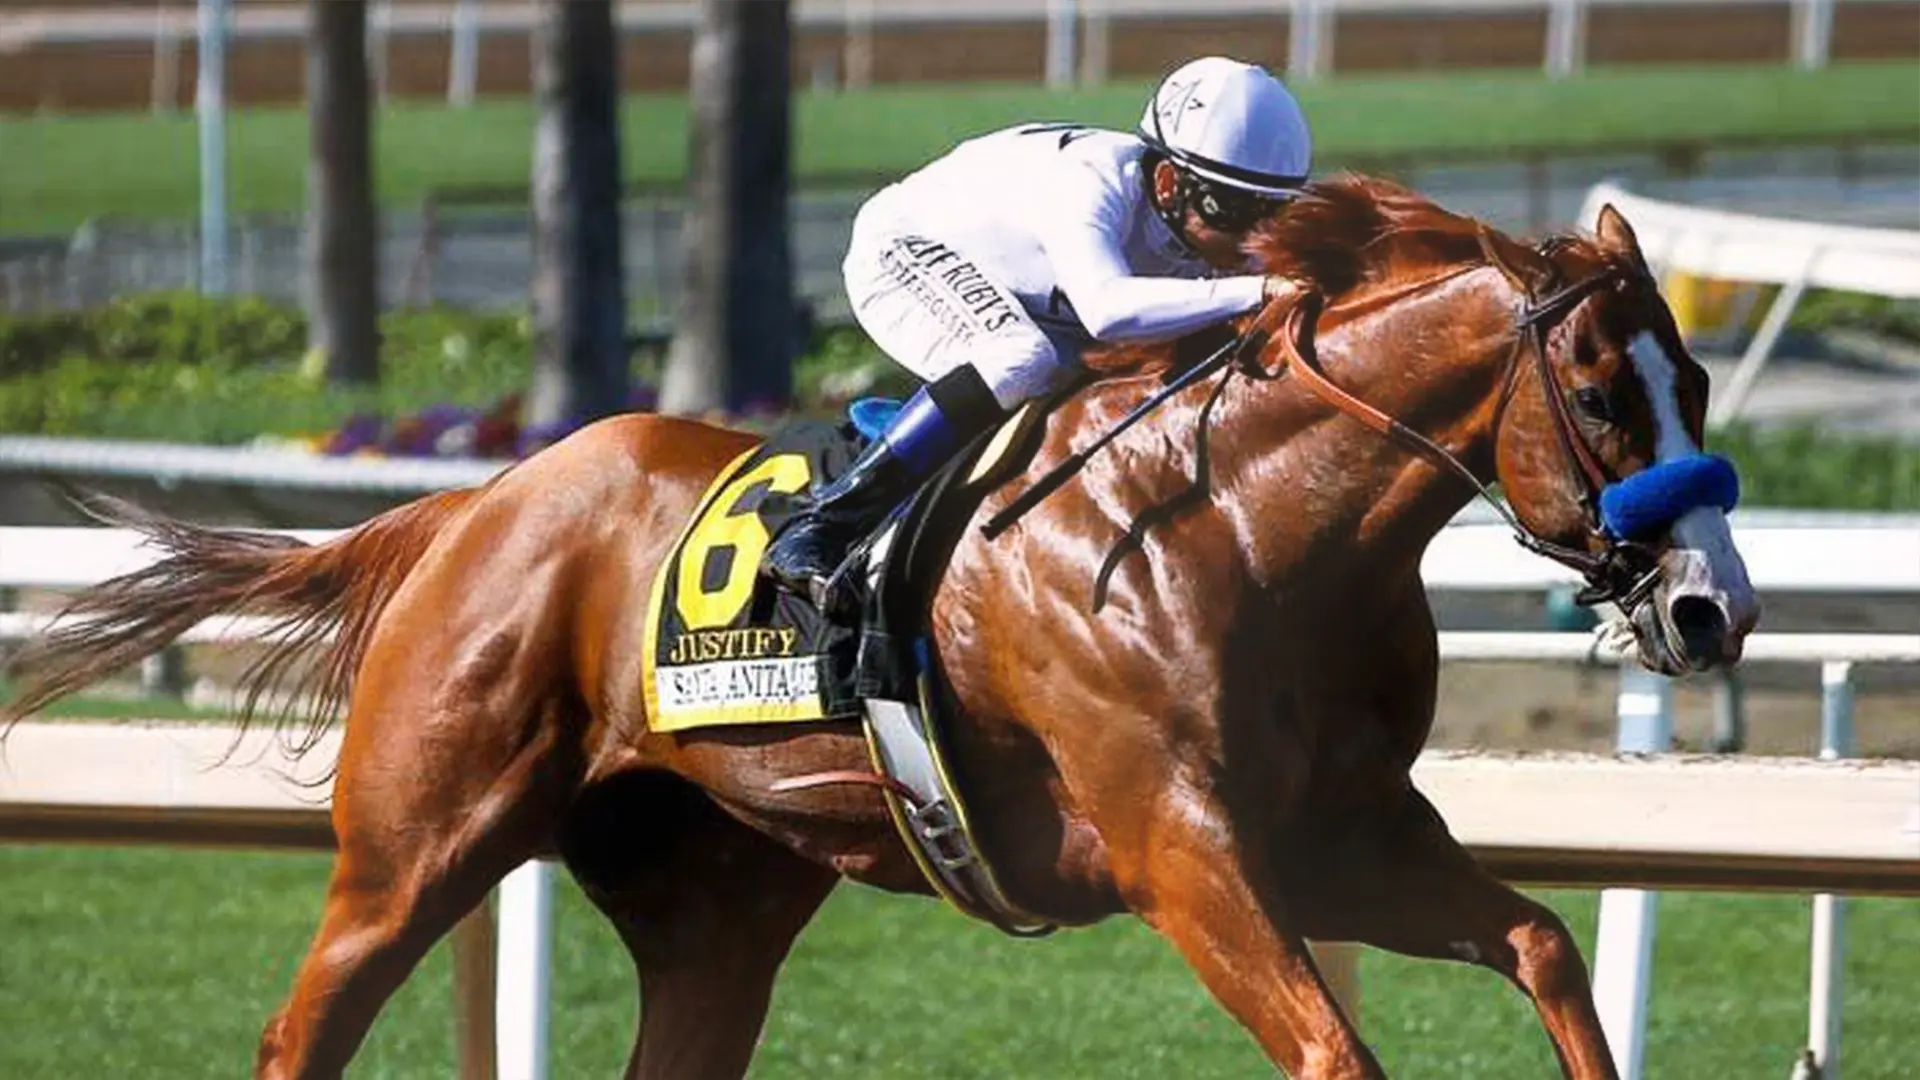 KENTUCKY DERBY ODDS AND PREVIEW